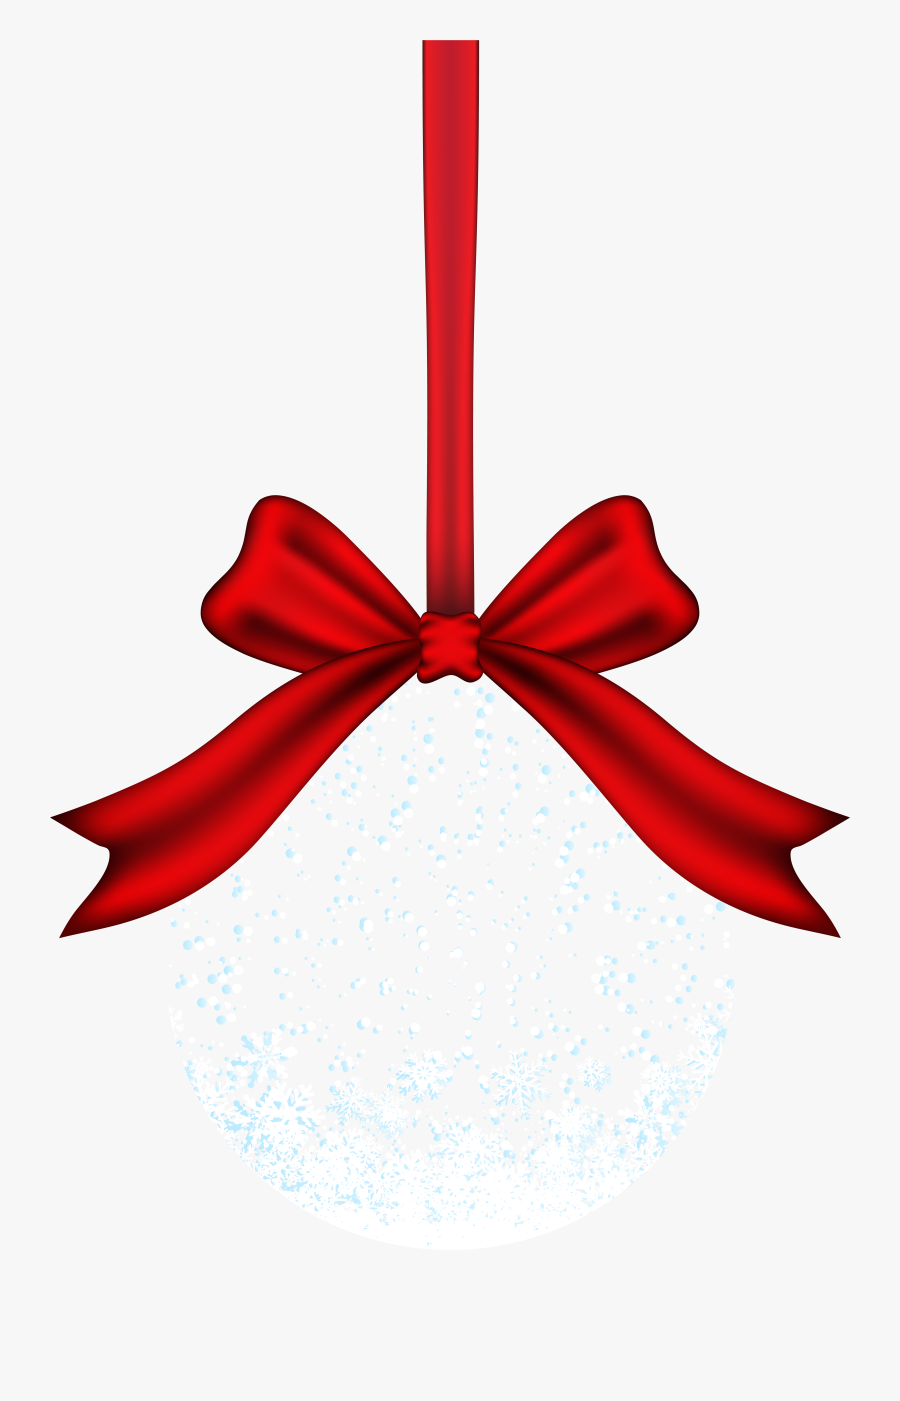 Christmas Ball Png Transparent Clipart , Png Download - Christmas Ball Png Transparent, Transparent Clipart